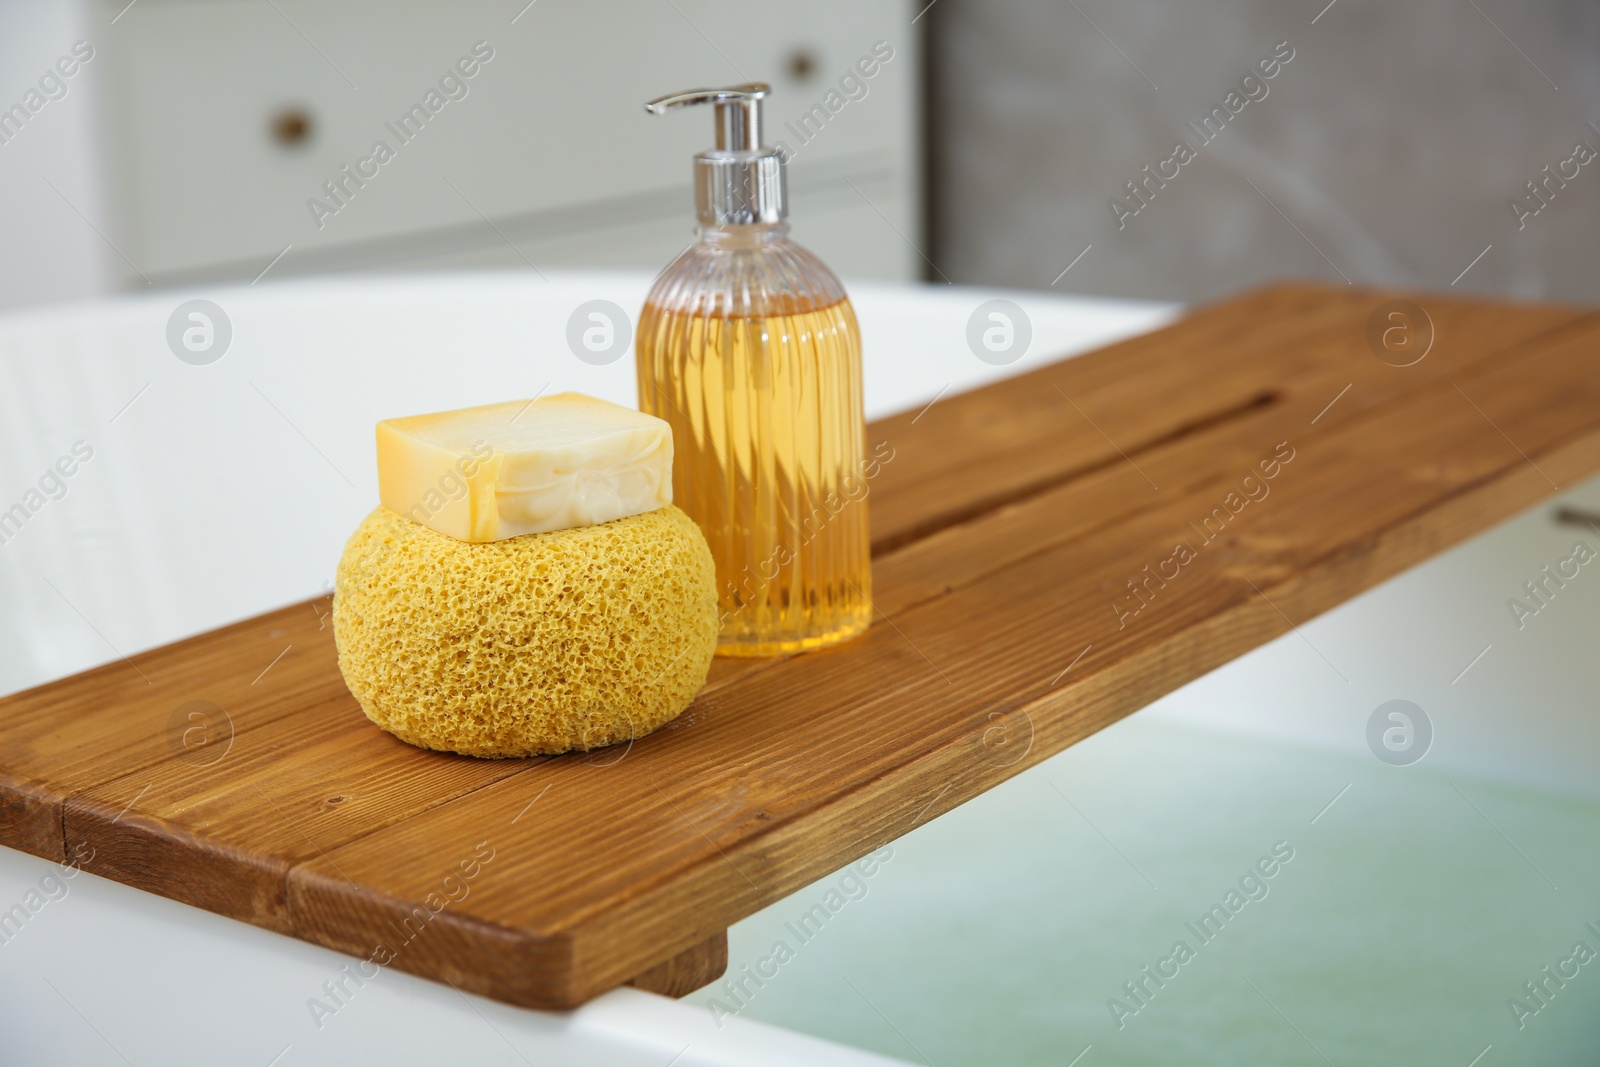 Photo of Wooden bath tray with sponge, soap bar and dispenser on tub